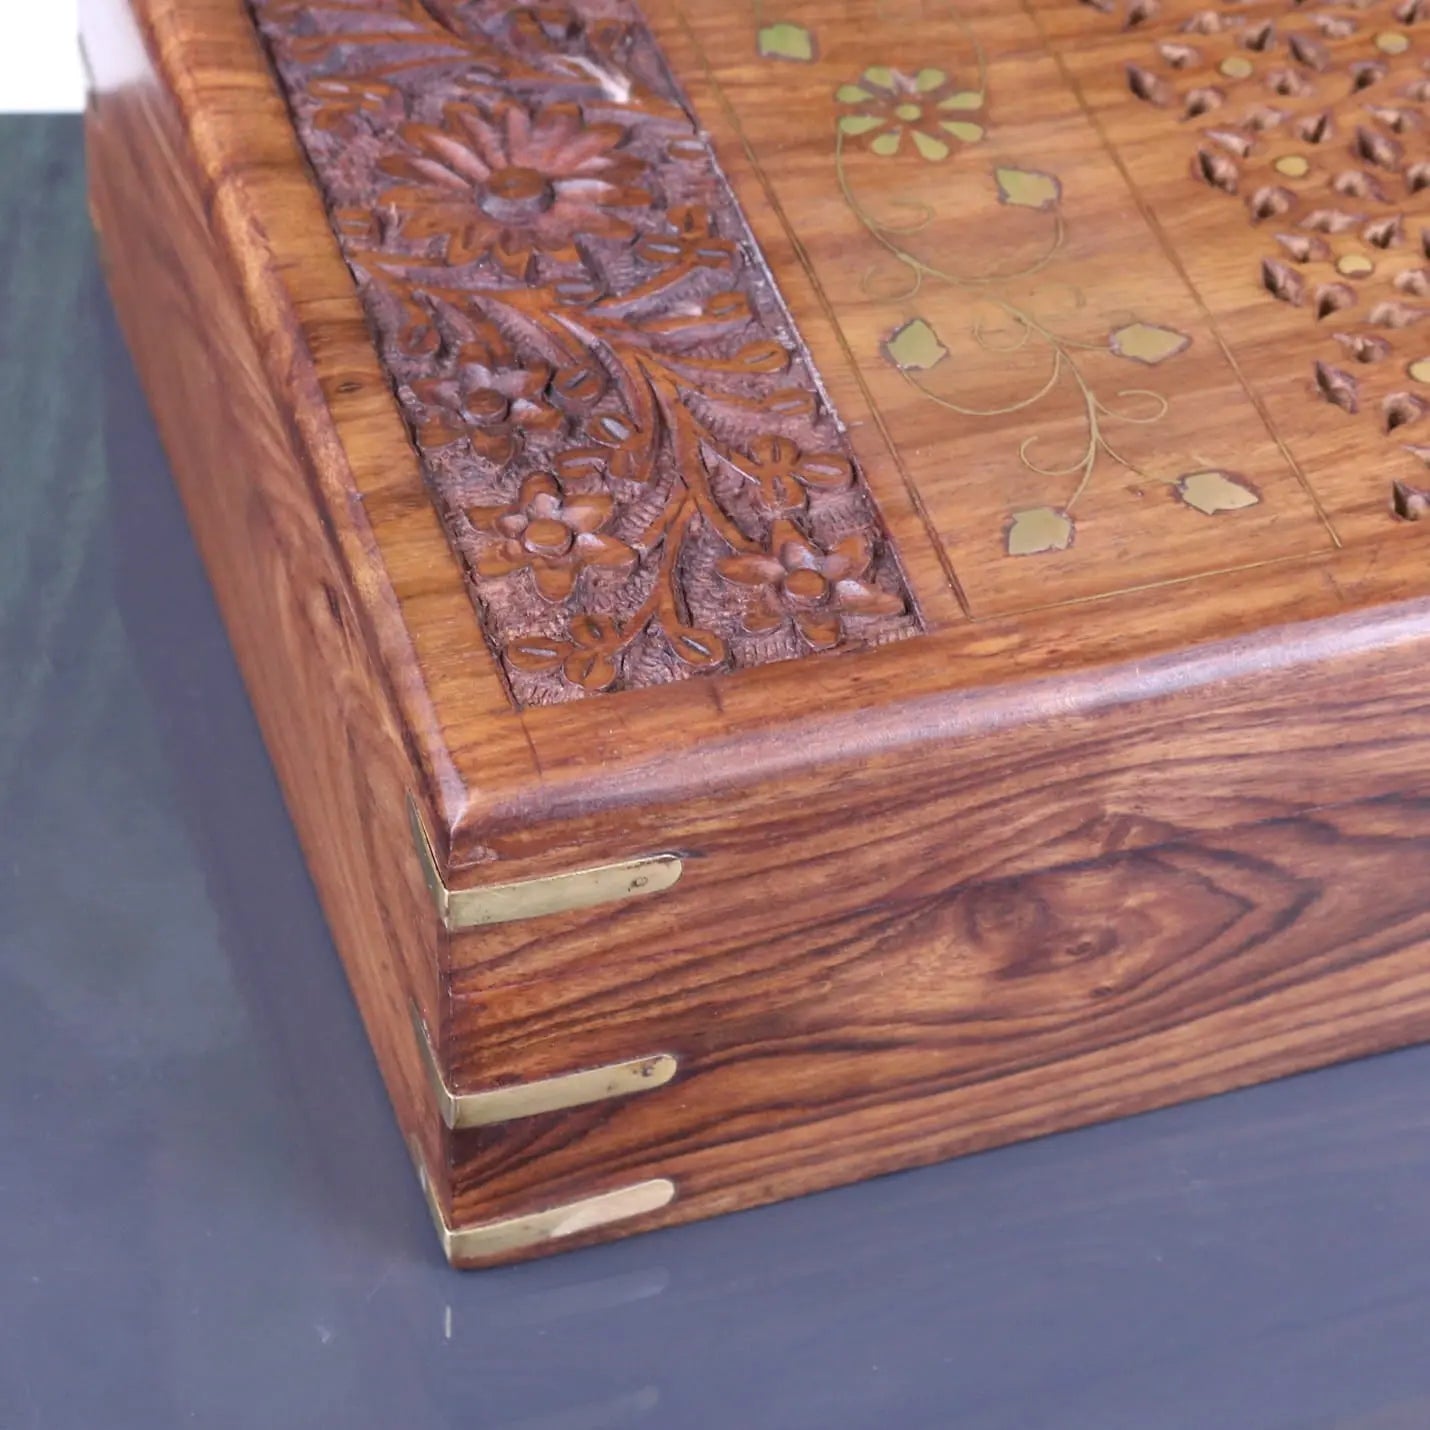 Vervek Large Carved Storage Box with Brass Inlay - Closeup of Carving